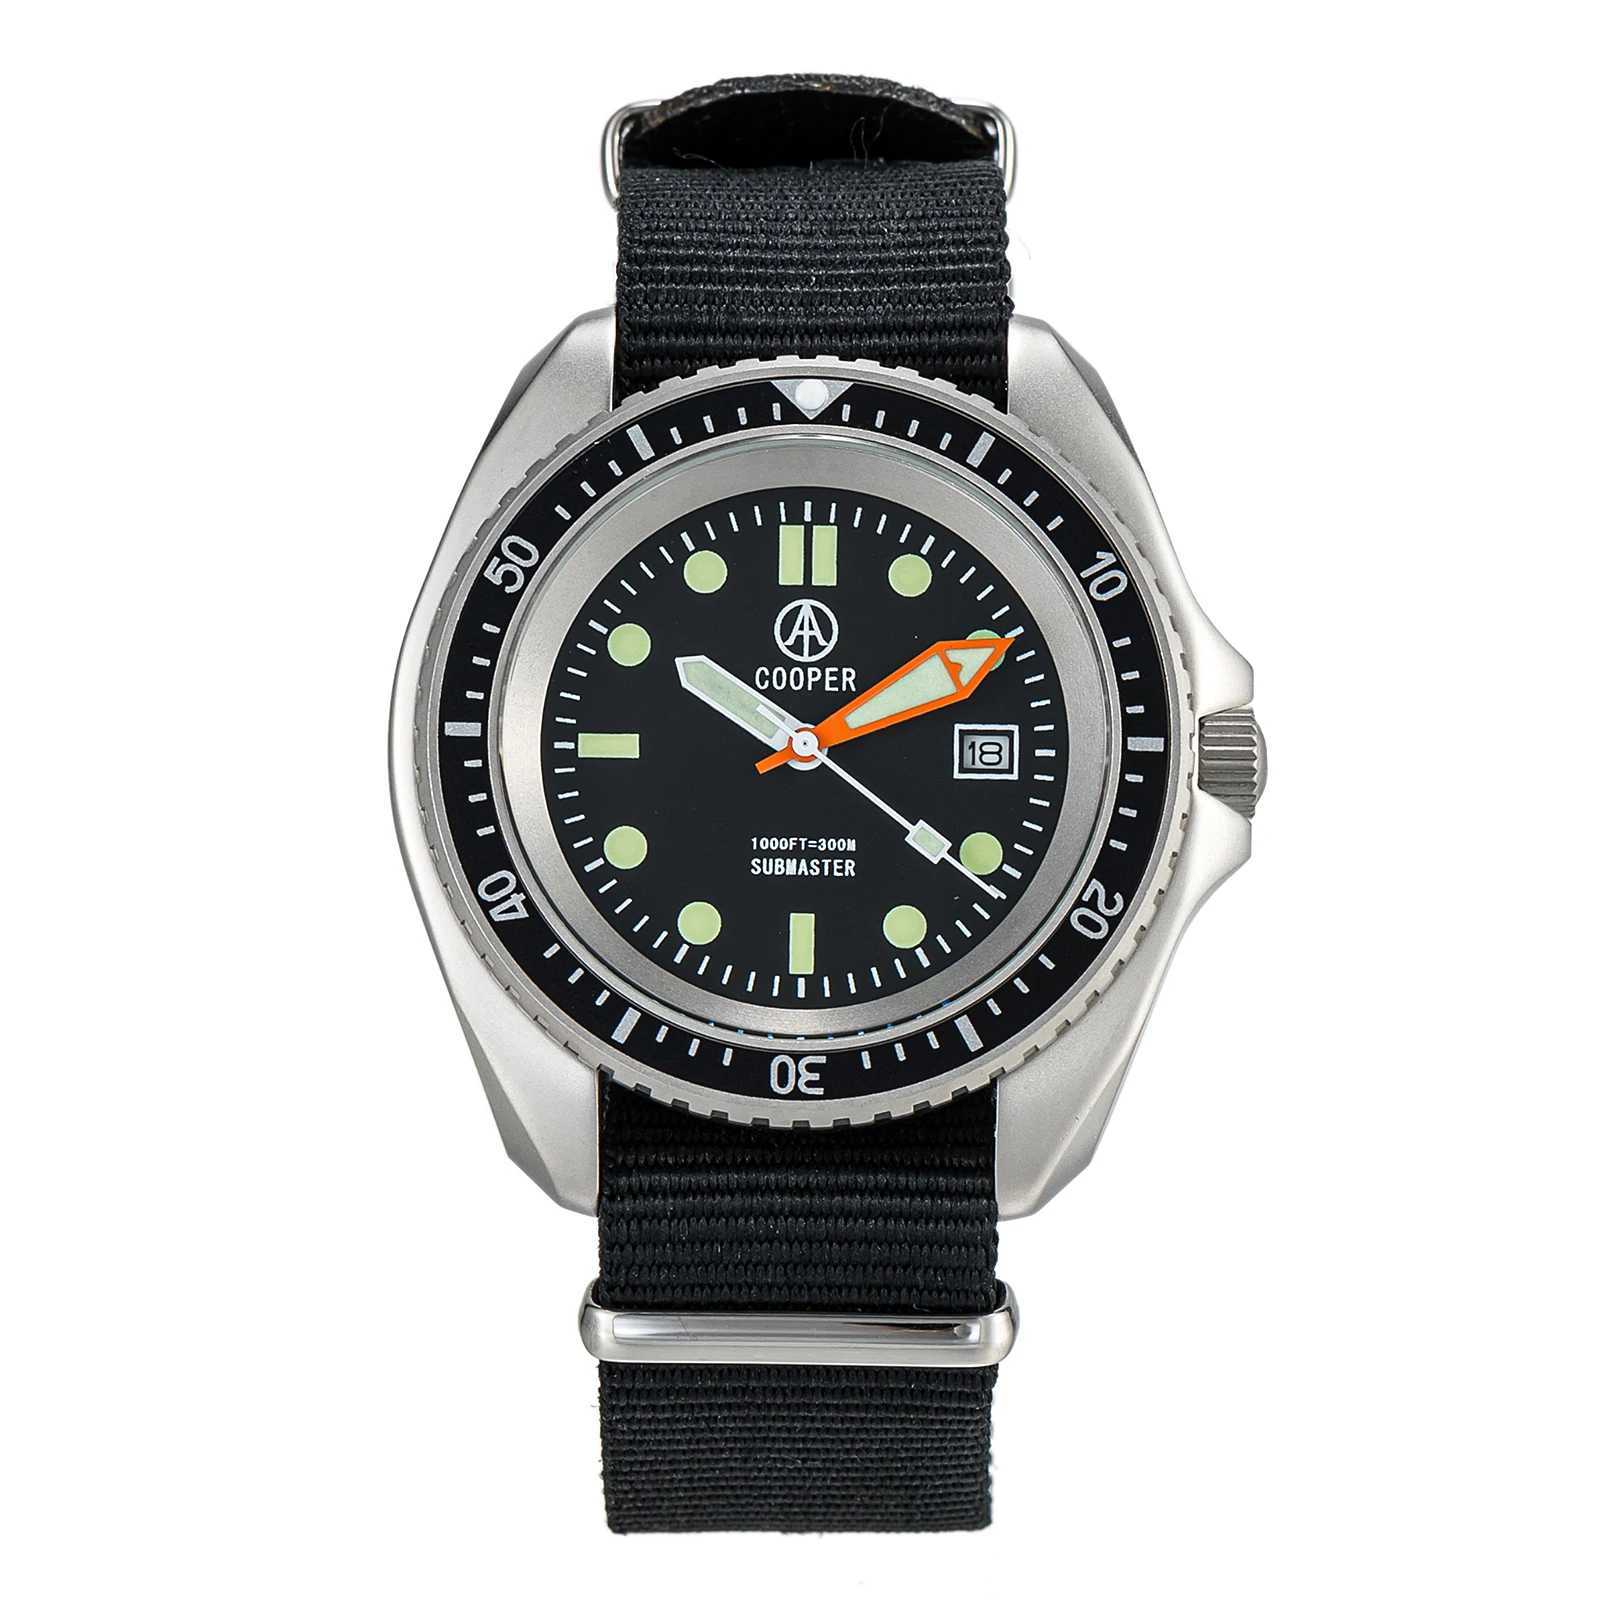 Other Watches Factory original 42mm Cooper Submarine SAS SBS Military 300M Diver Mens Watch Super Bright NATO BRAP 8016 R New Arrival J240131